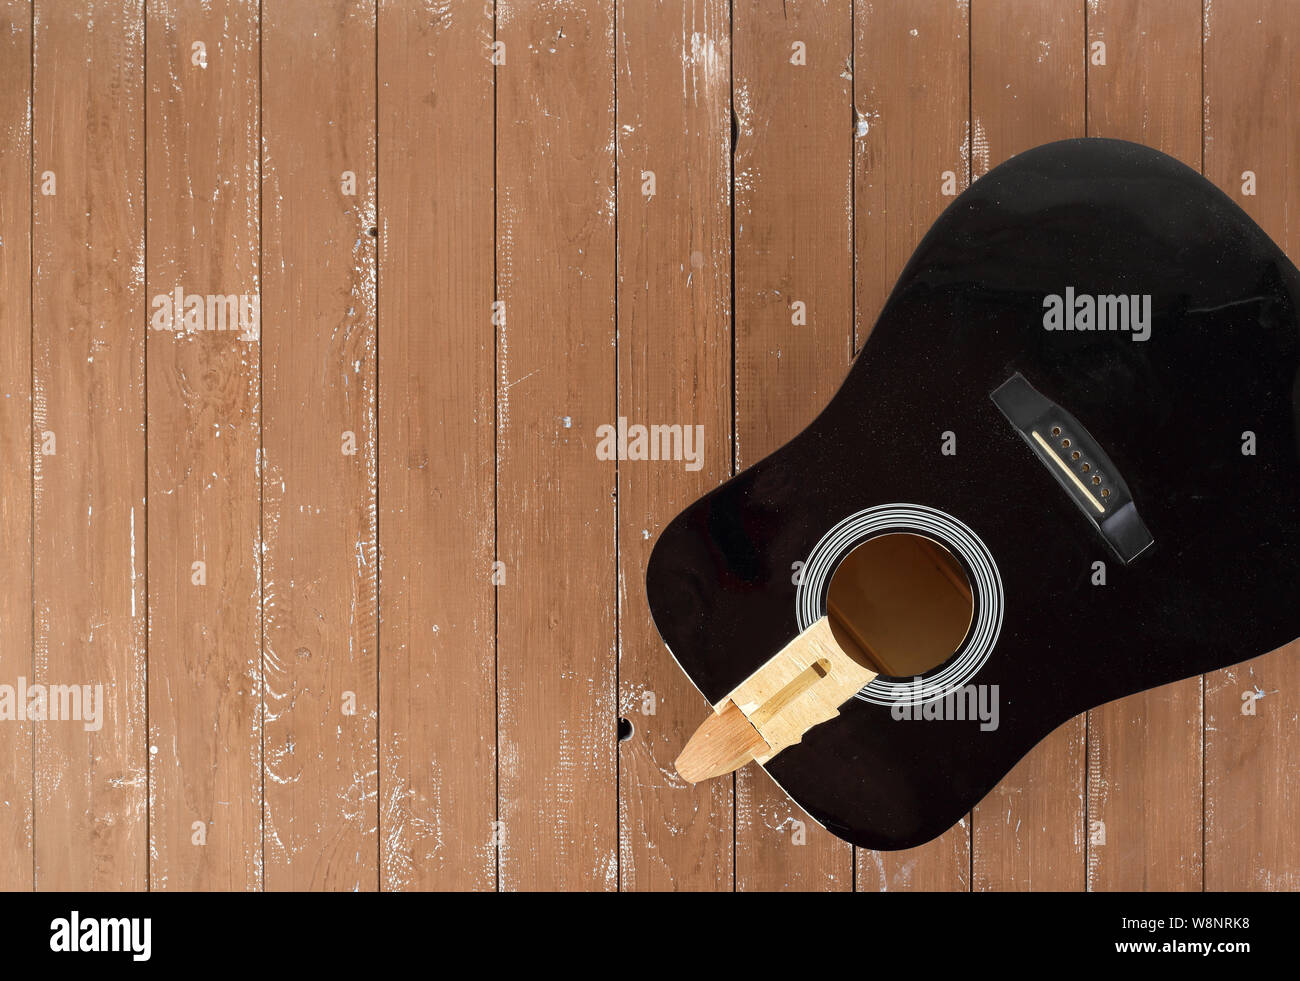 Guitar repair and service - broken sound board acoustic guitar top view wooden background Stock Photo